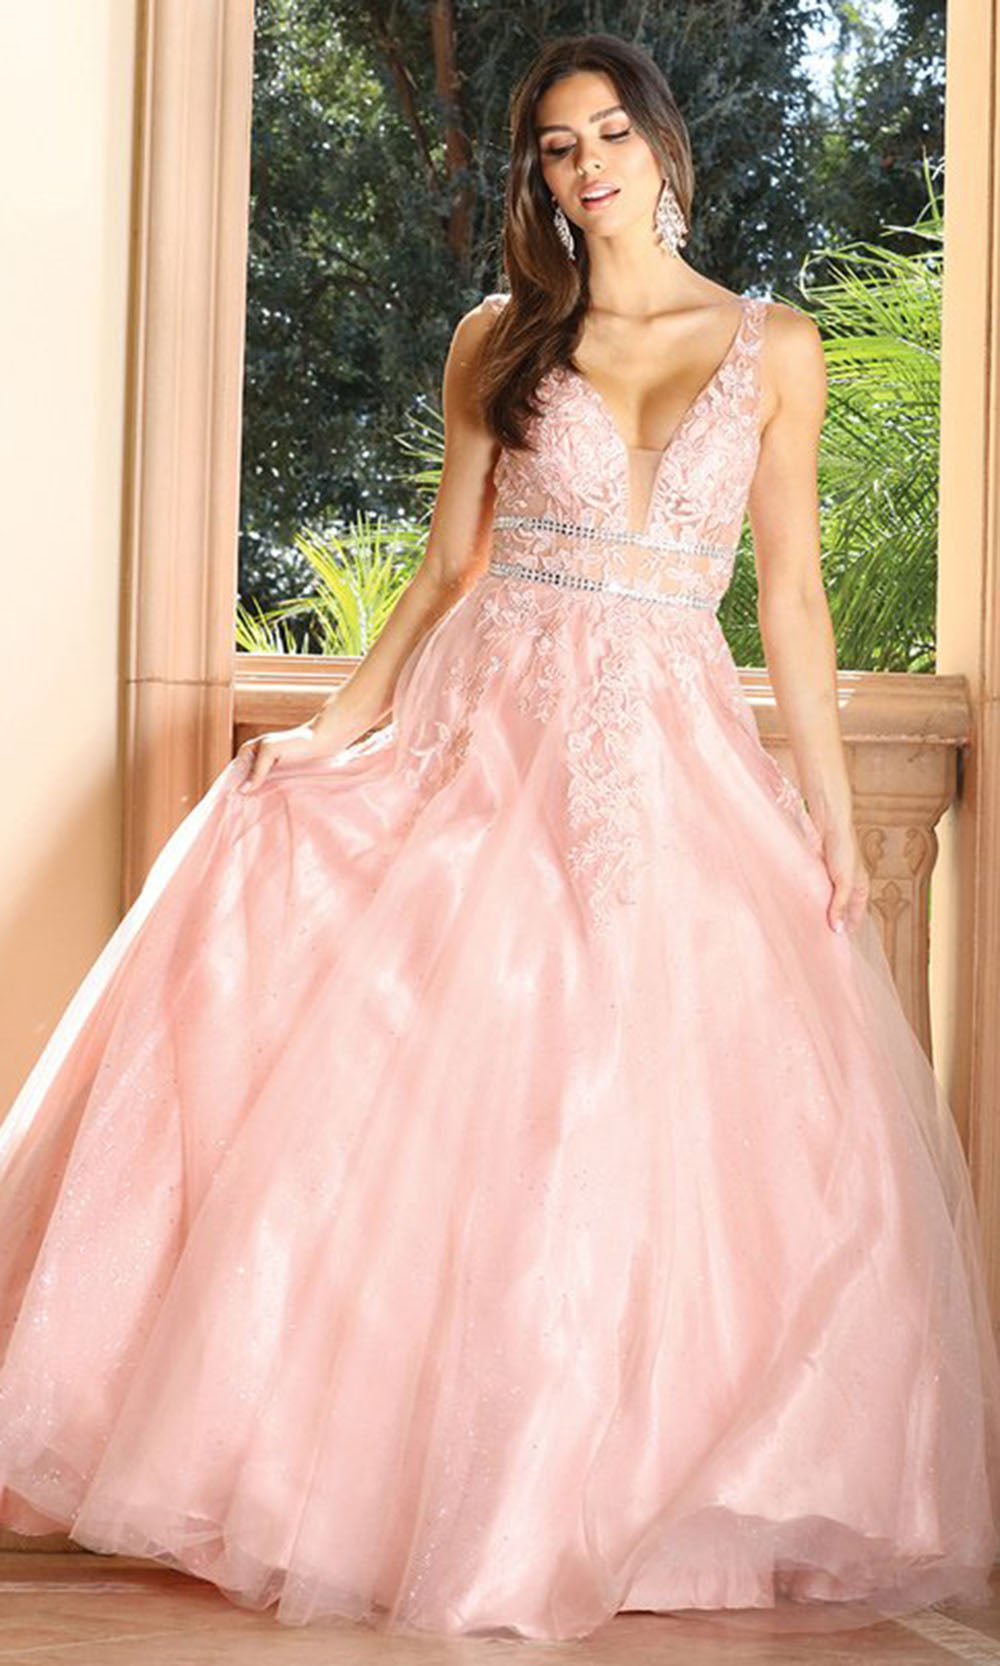 Dancing Queen - 4041 Lace Applique Double Circlet Ballgown In Pink